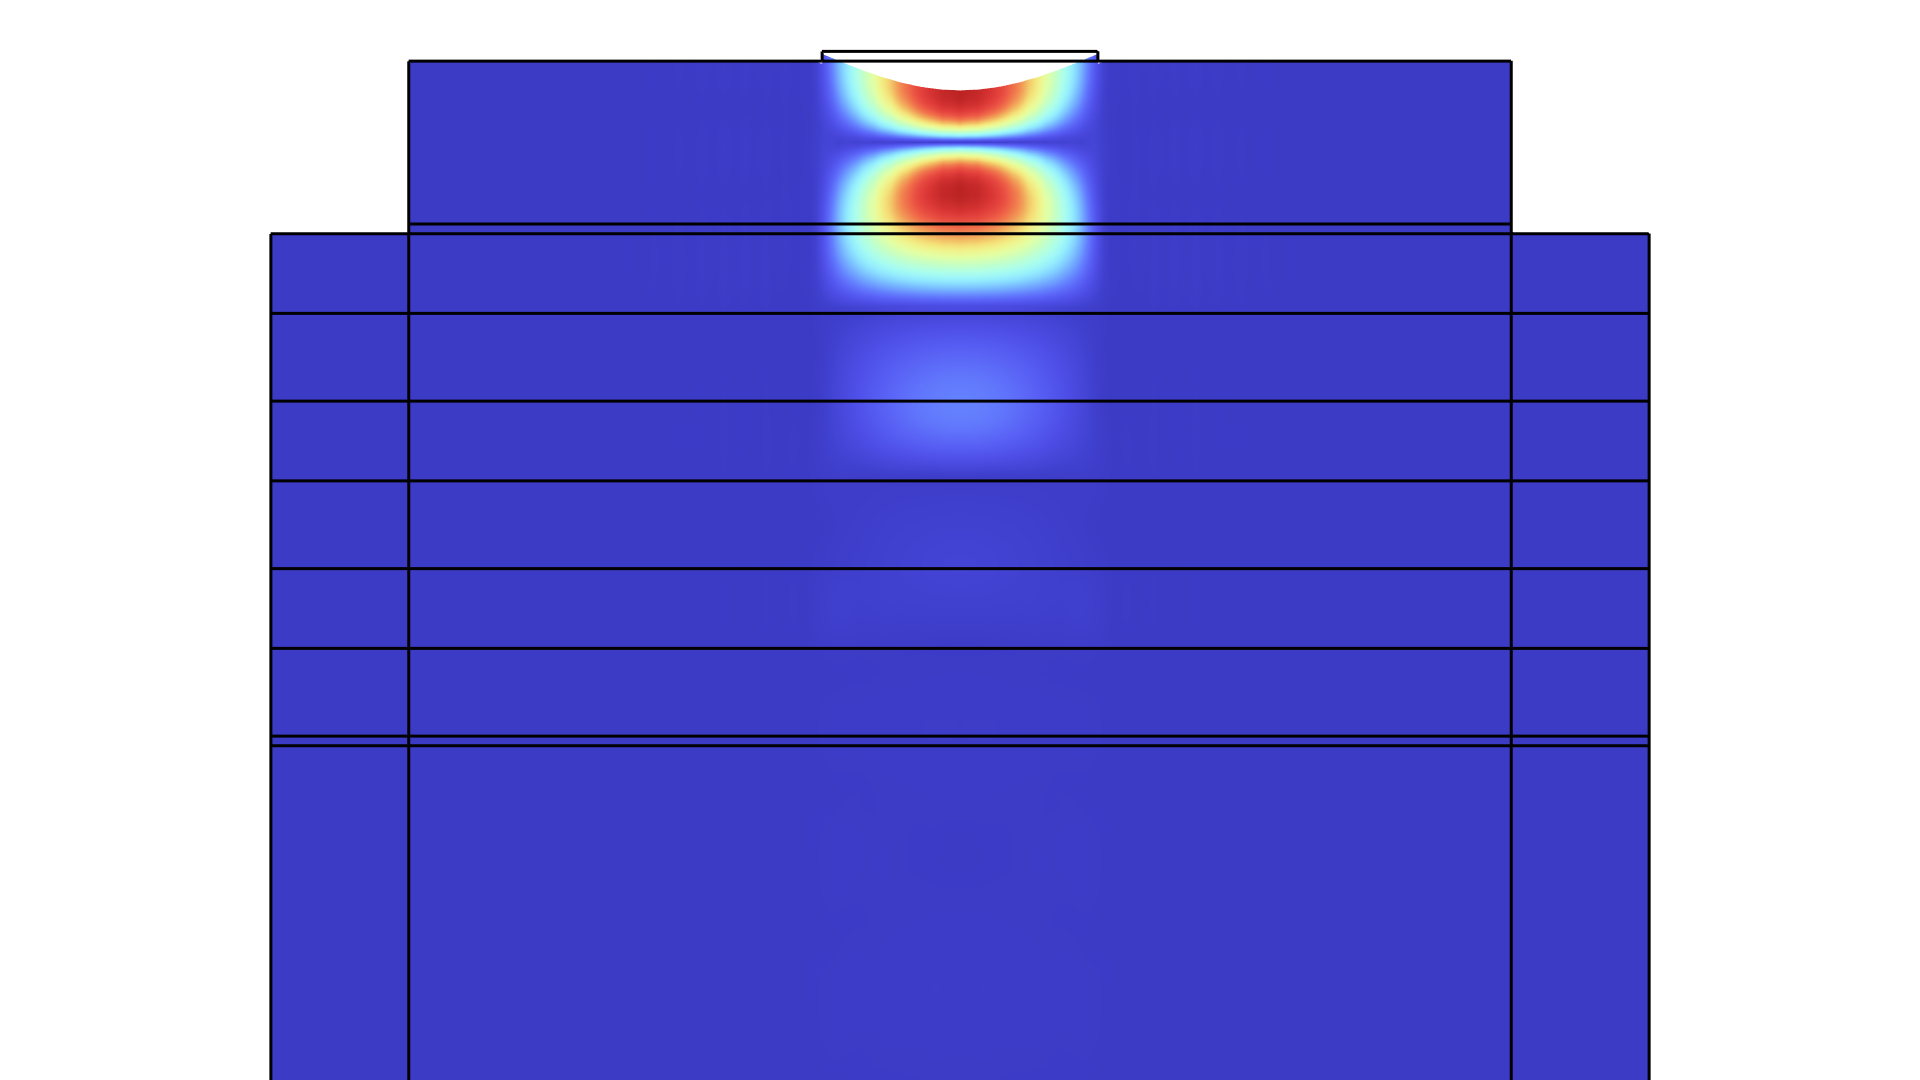 A resonator model showing the displacement in the Rainbow Light color table.